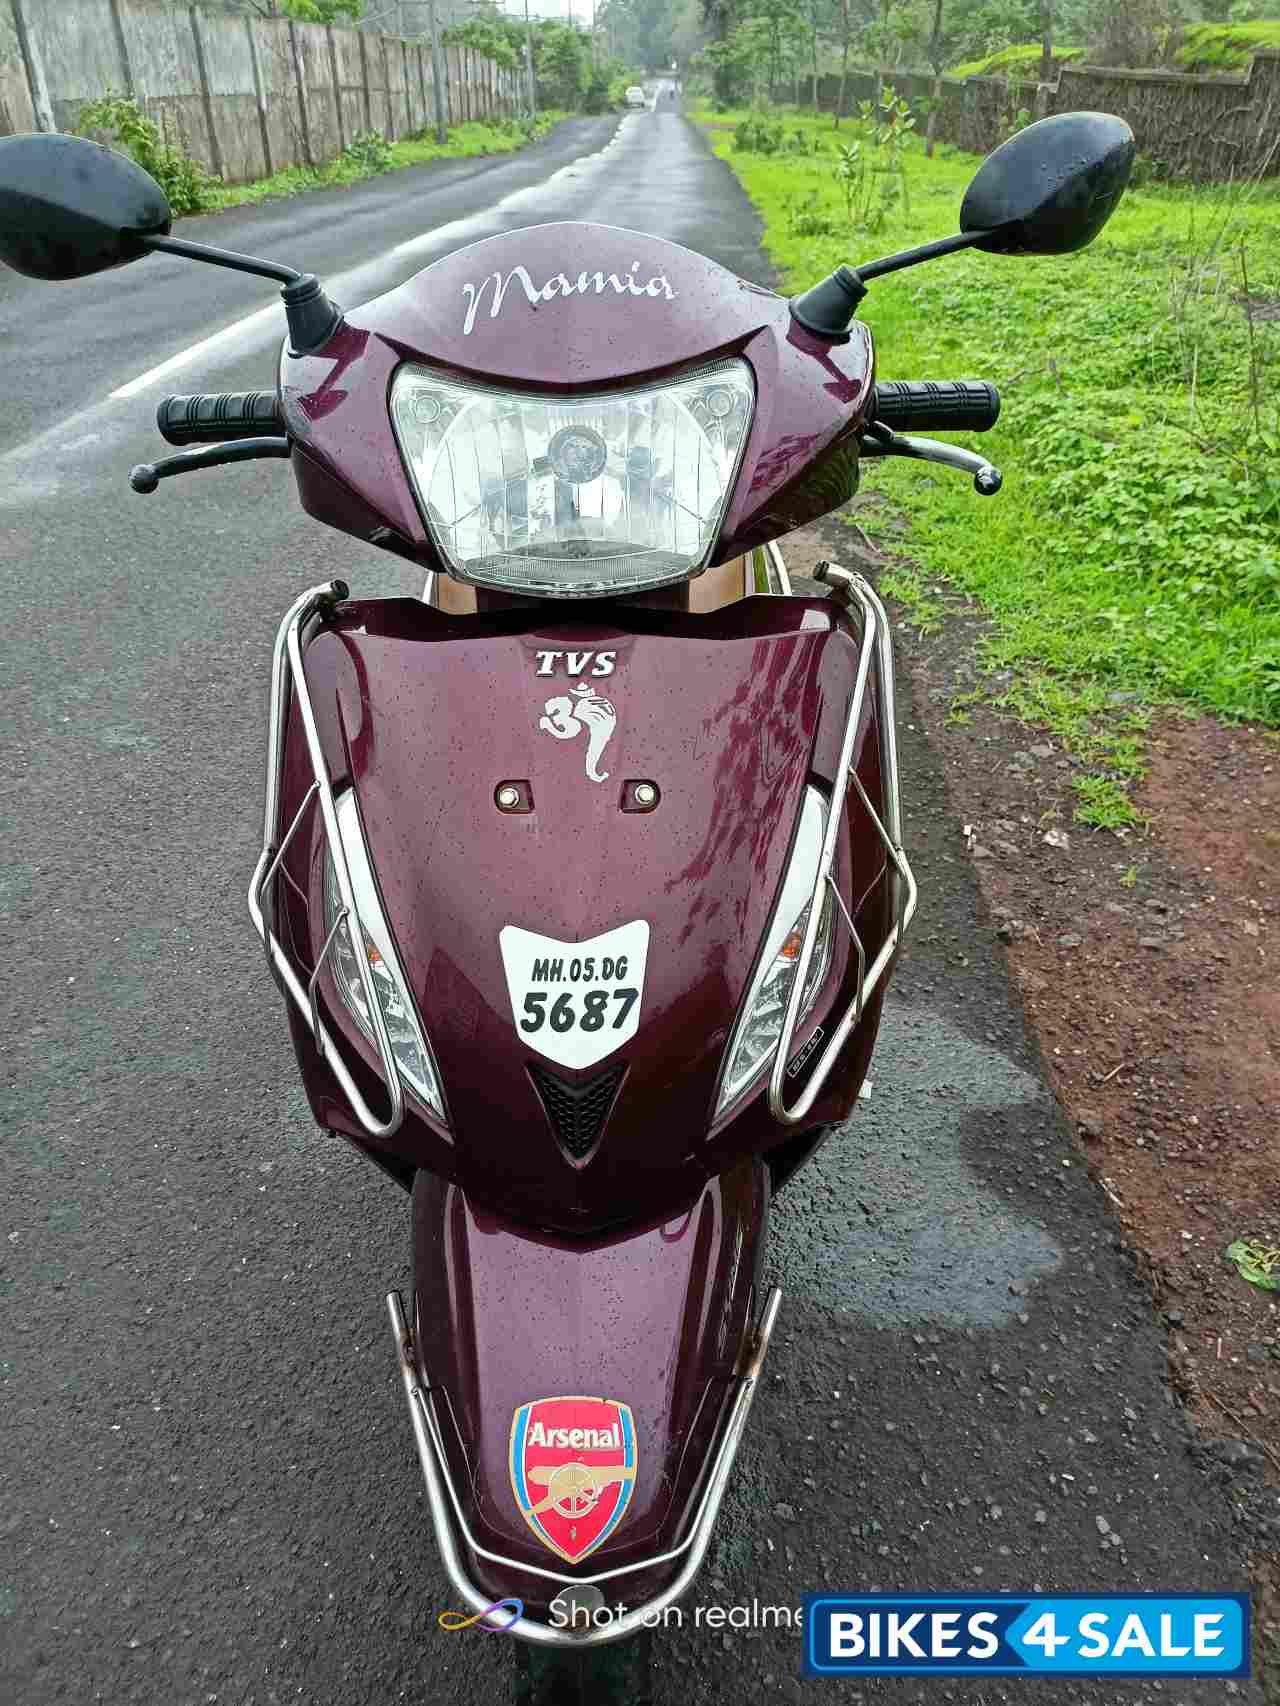 Used 2017 model TVS Jupiter ZX for sale in Thane. ID 344861 - Bikes4Sale